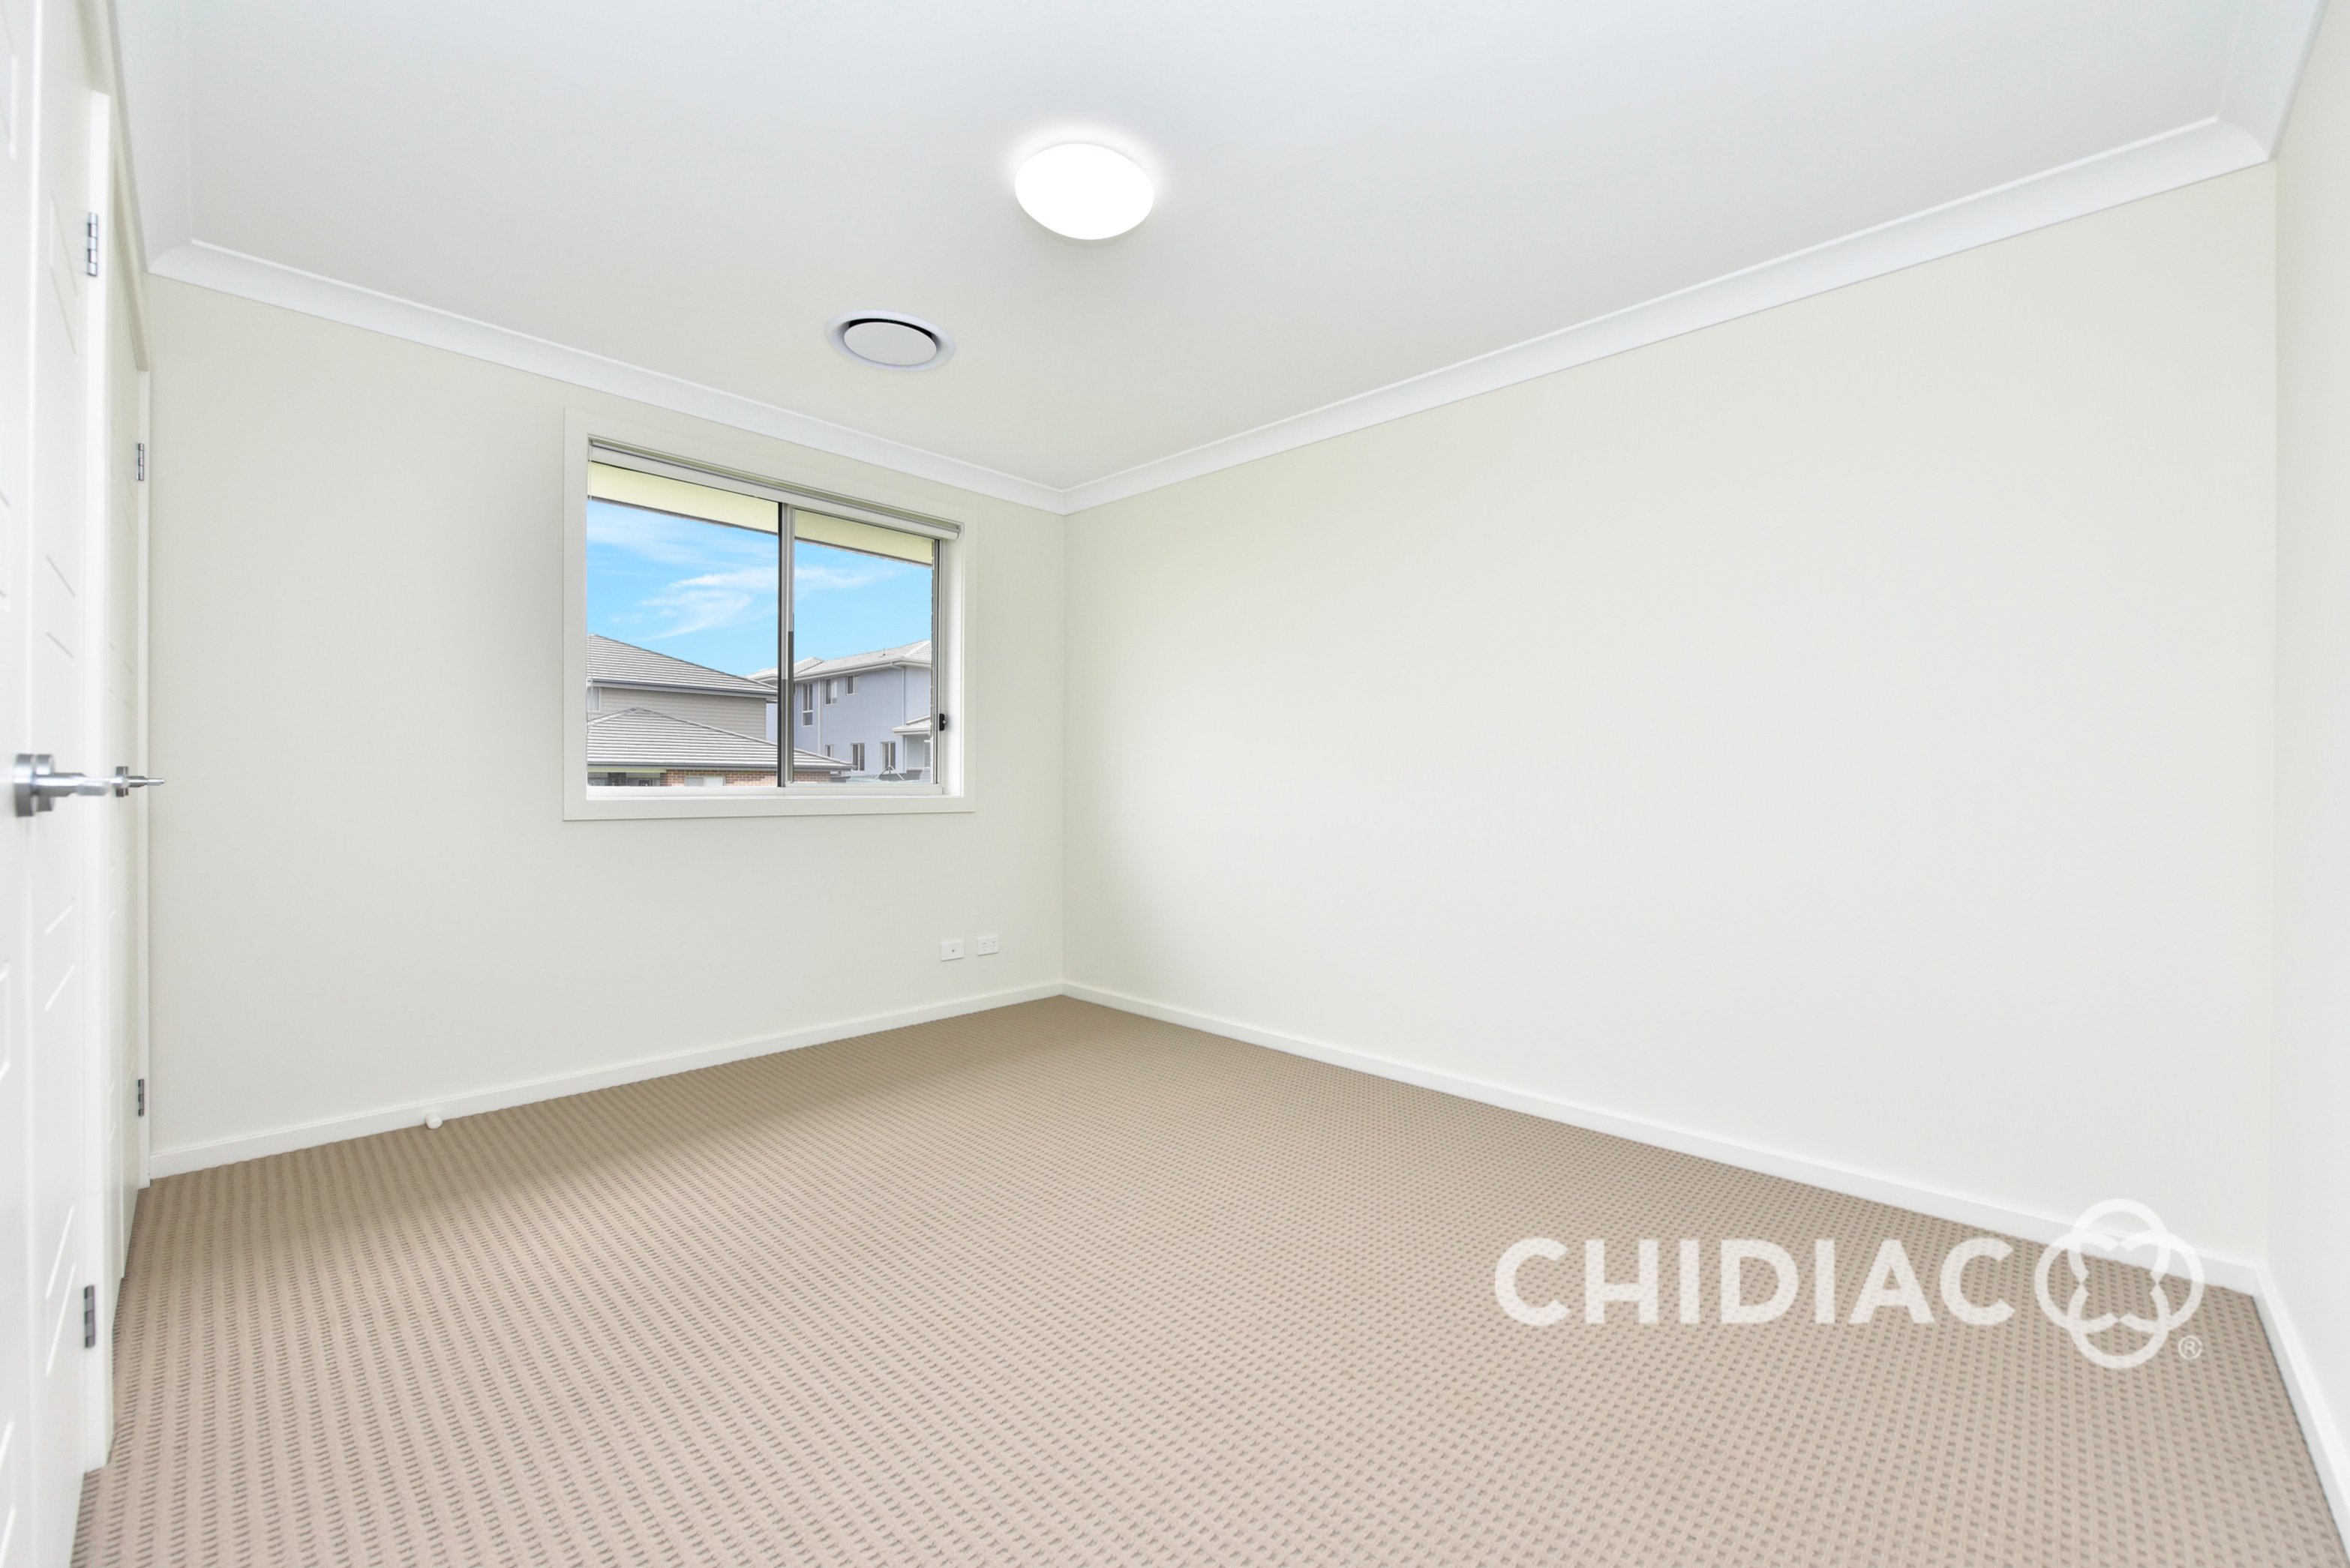 12 Memsie Street, Box Hill Leased by Chidiac Realty - image 5